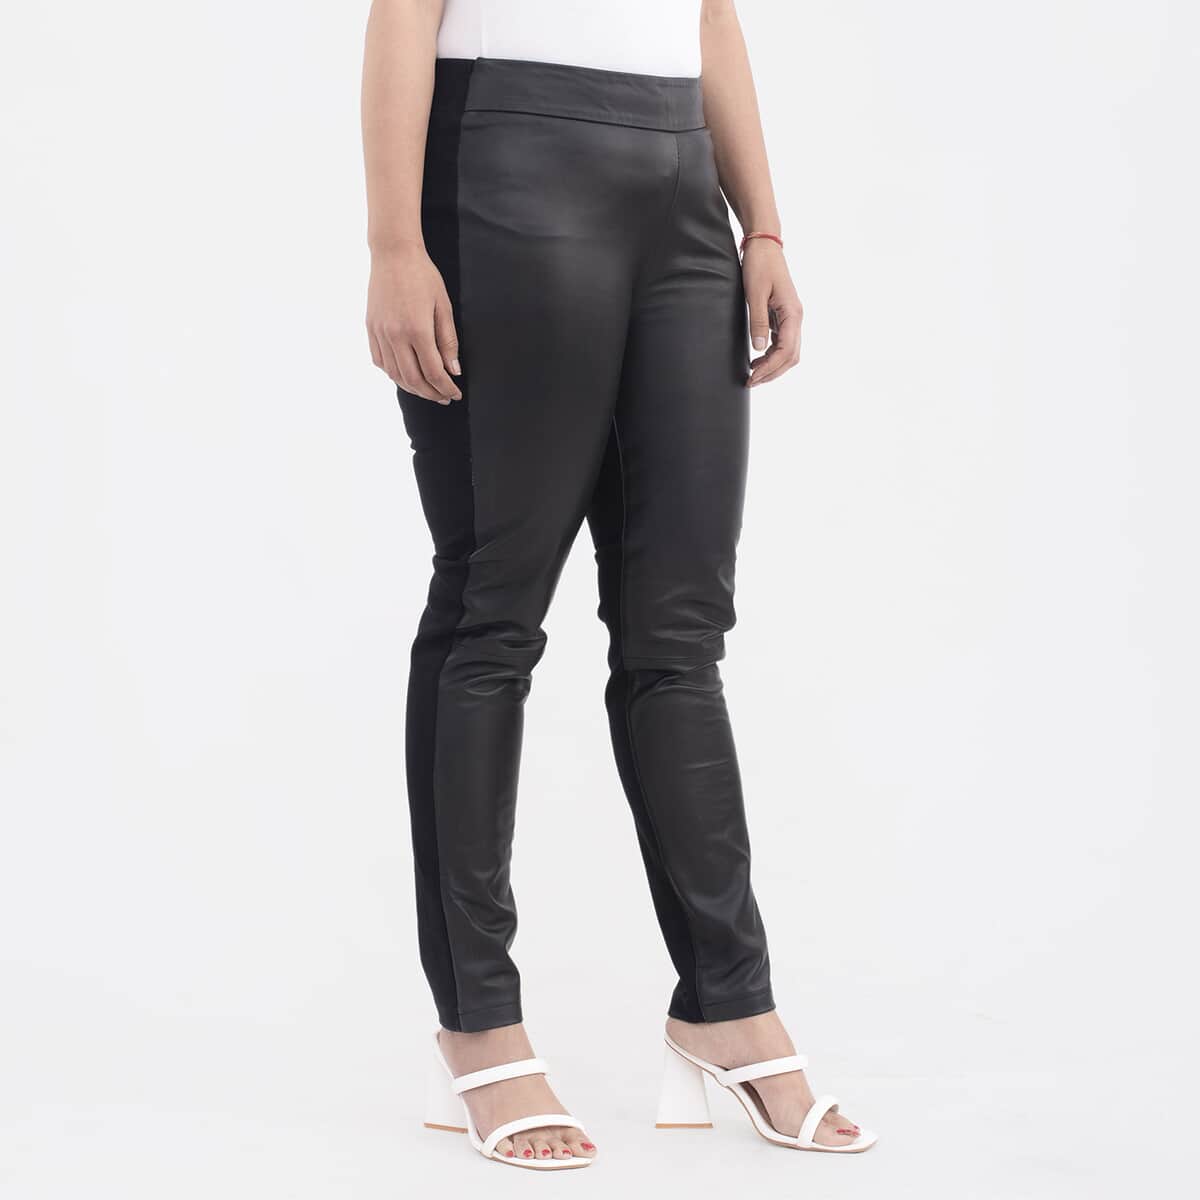 TAMSY Black Genuine Lamb Leather With Back Ponte Knit Legging - S image number 2